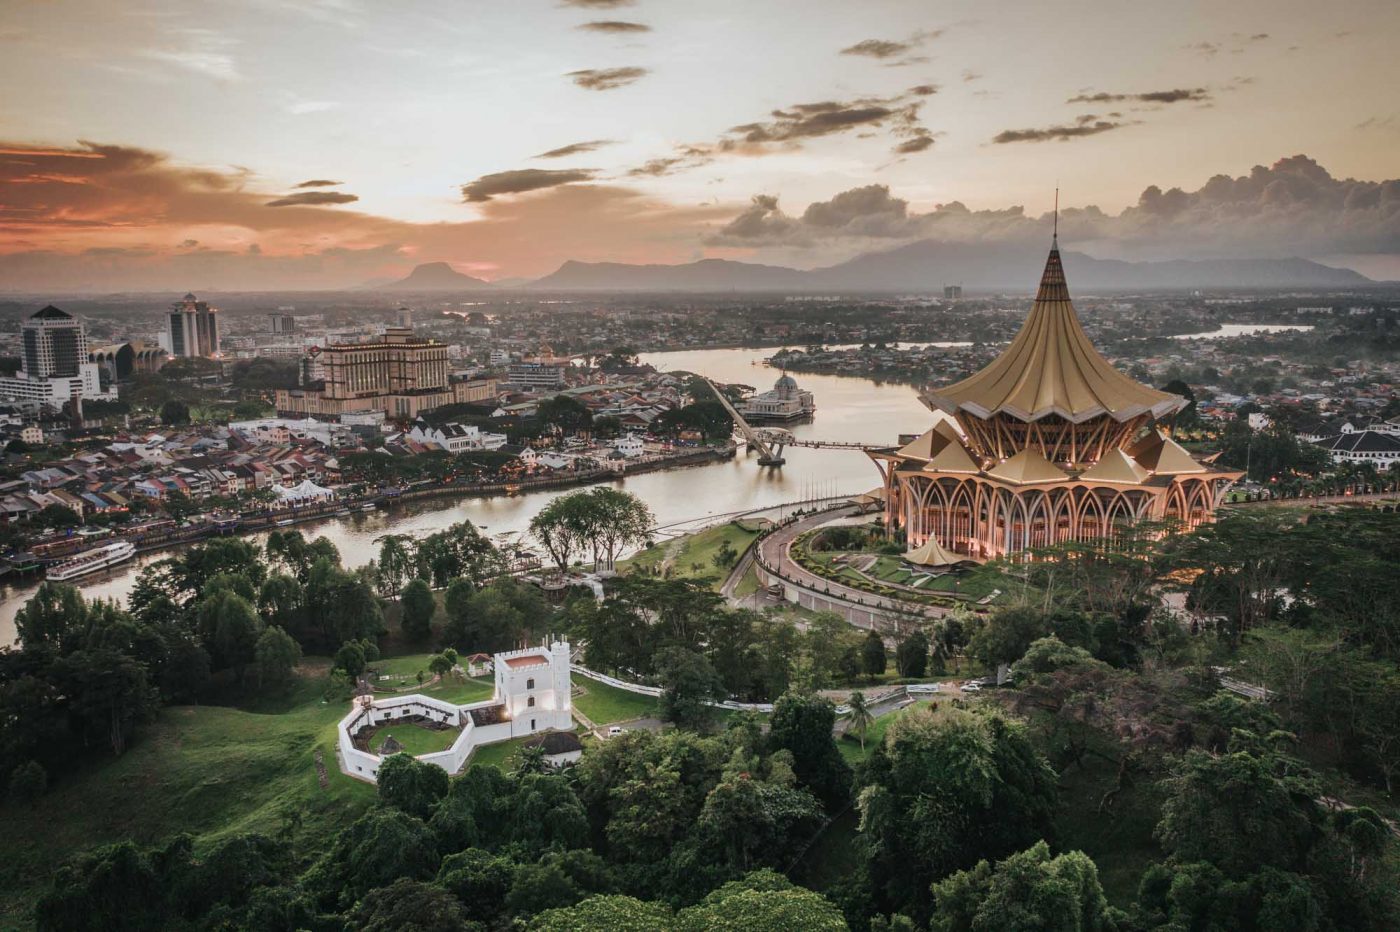 Notes on the built environment of Kuching, Sarawak in